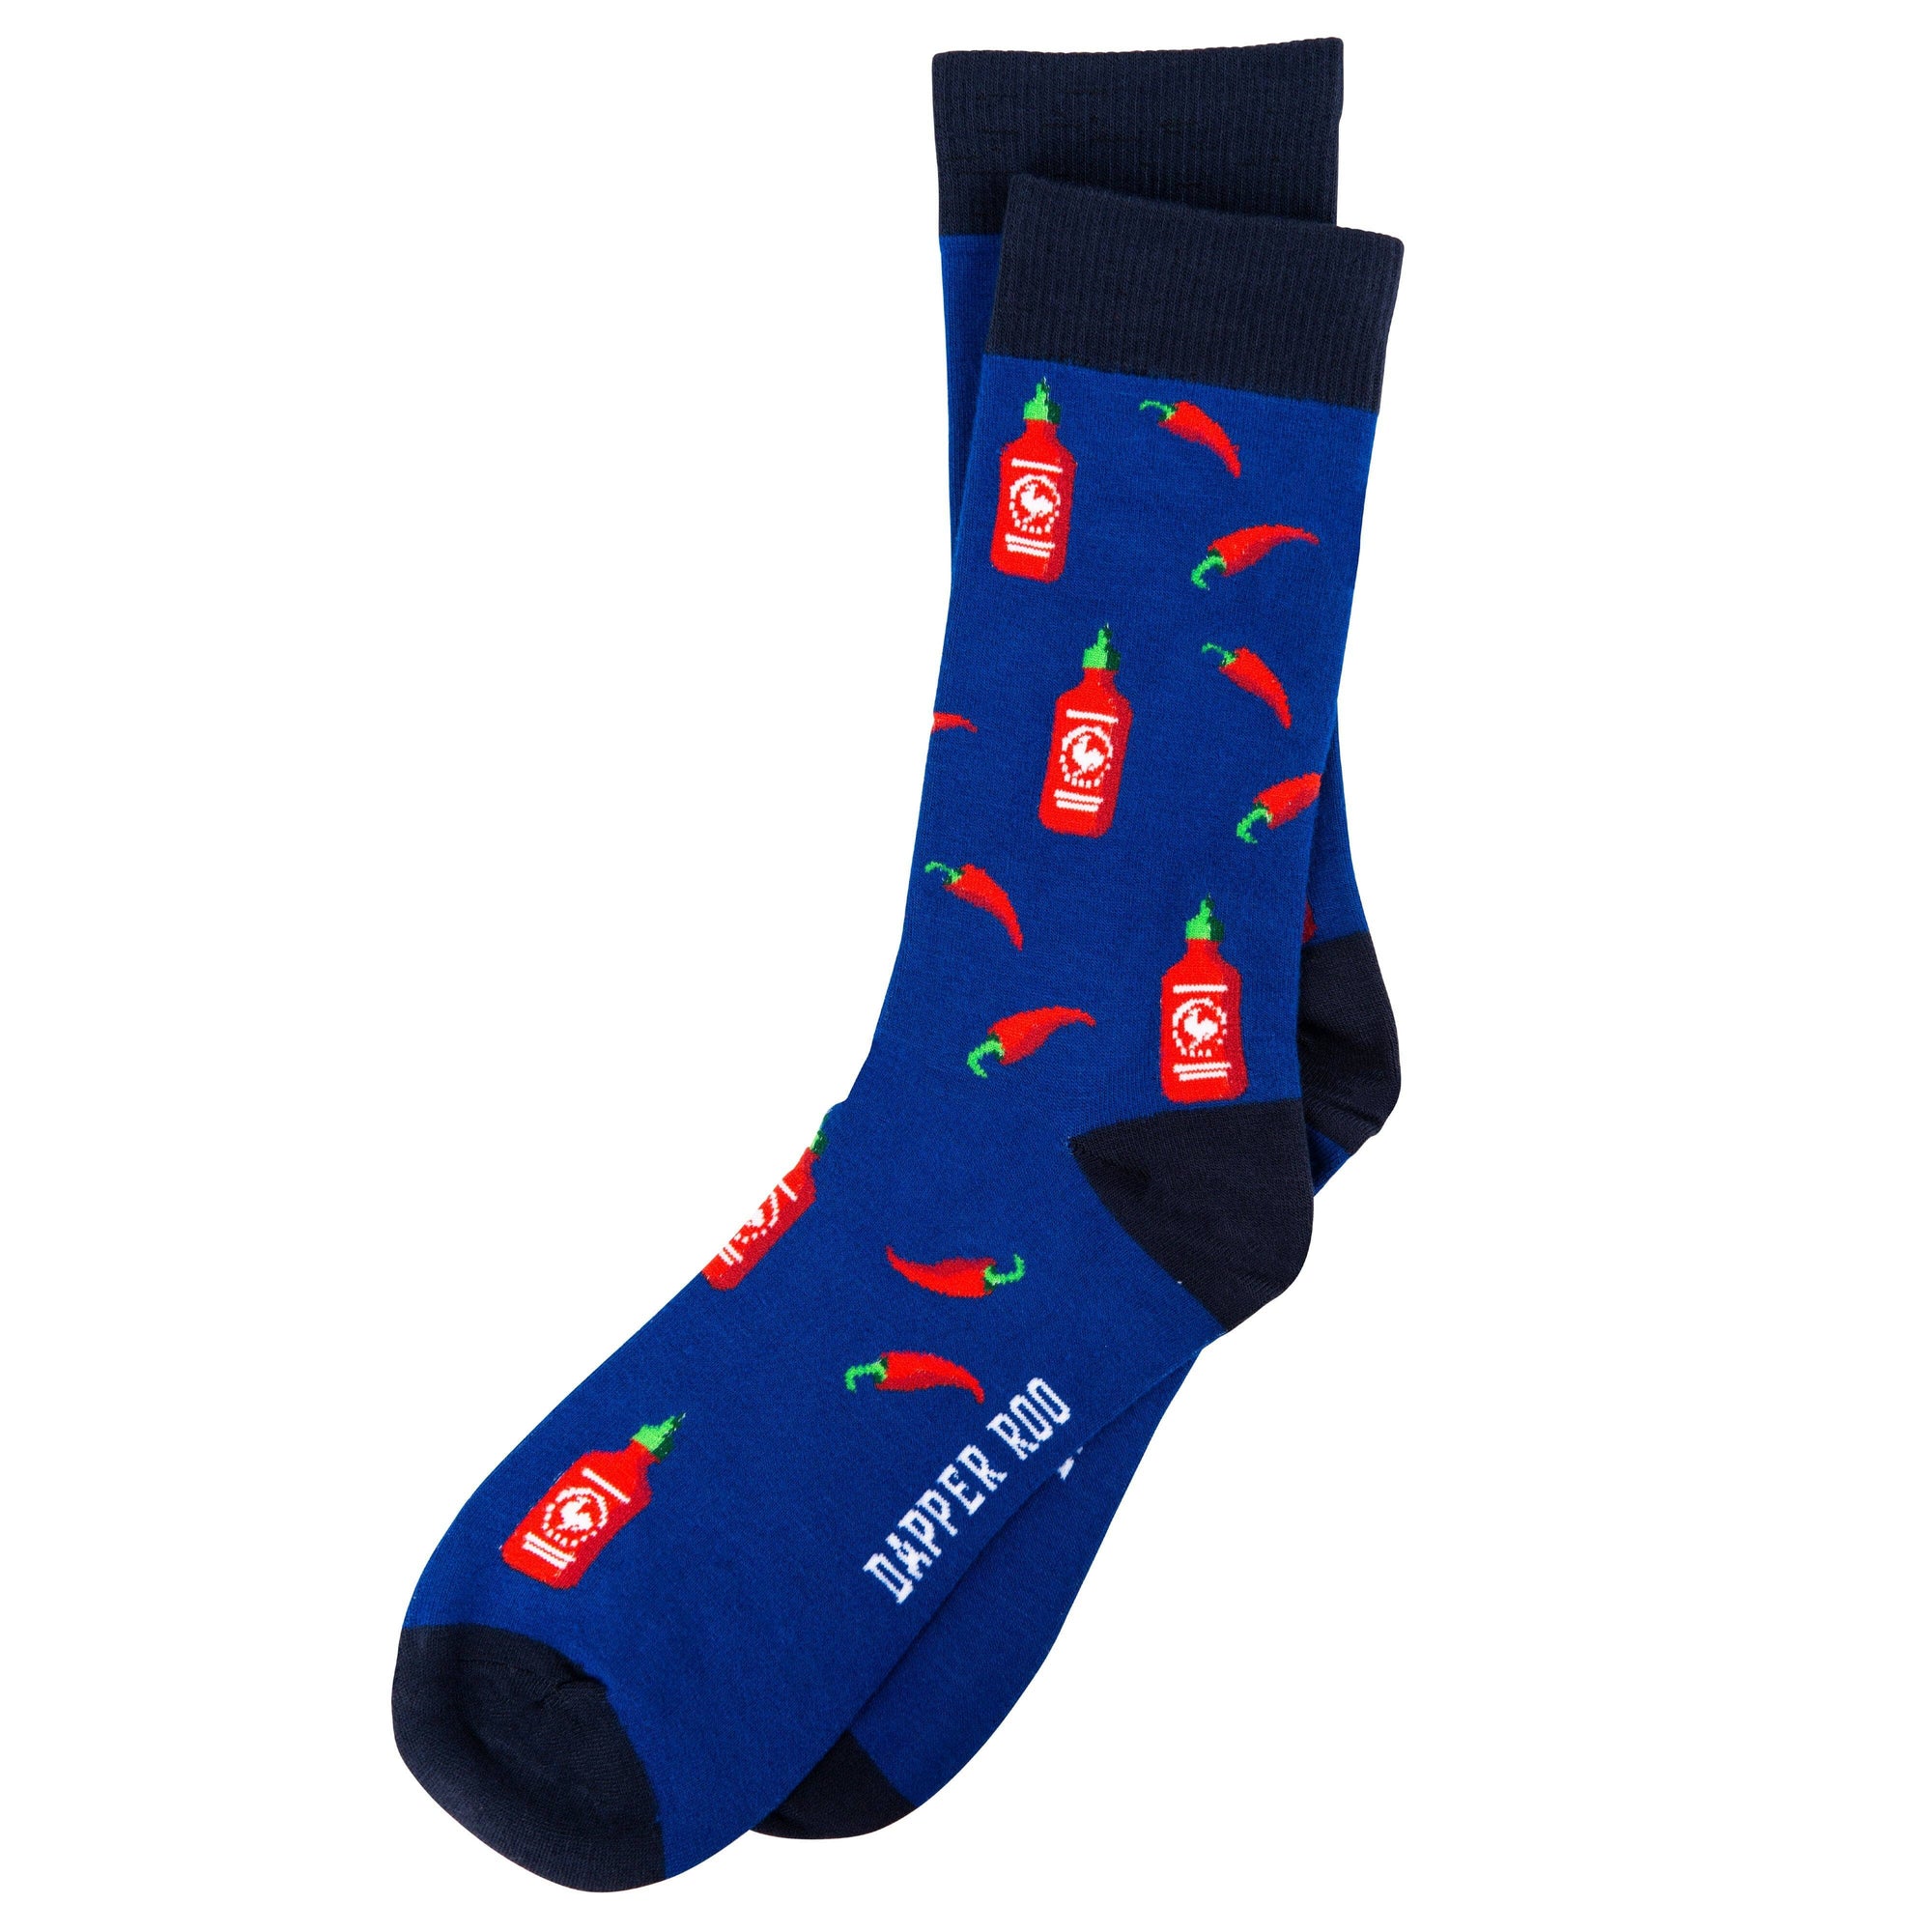 Spicy Kick Chilli and Hot Sauce Bamboo Socks by Dapper Roo Socks Dapper Roo Default 